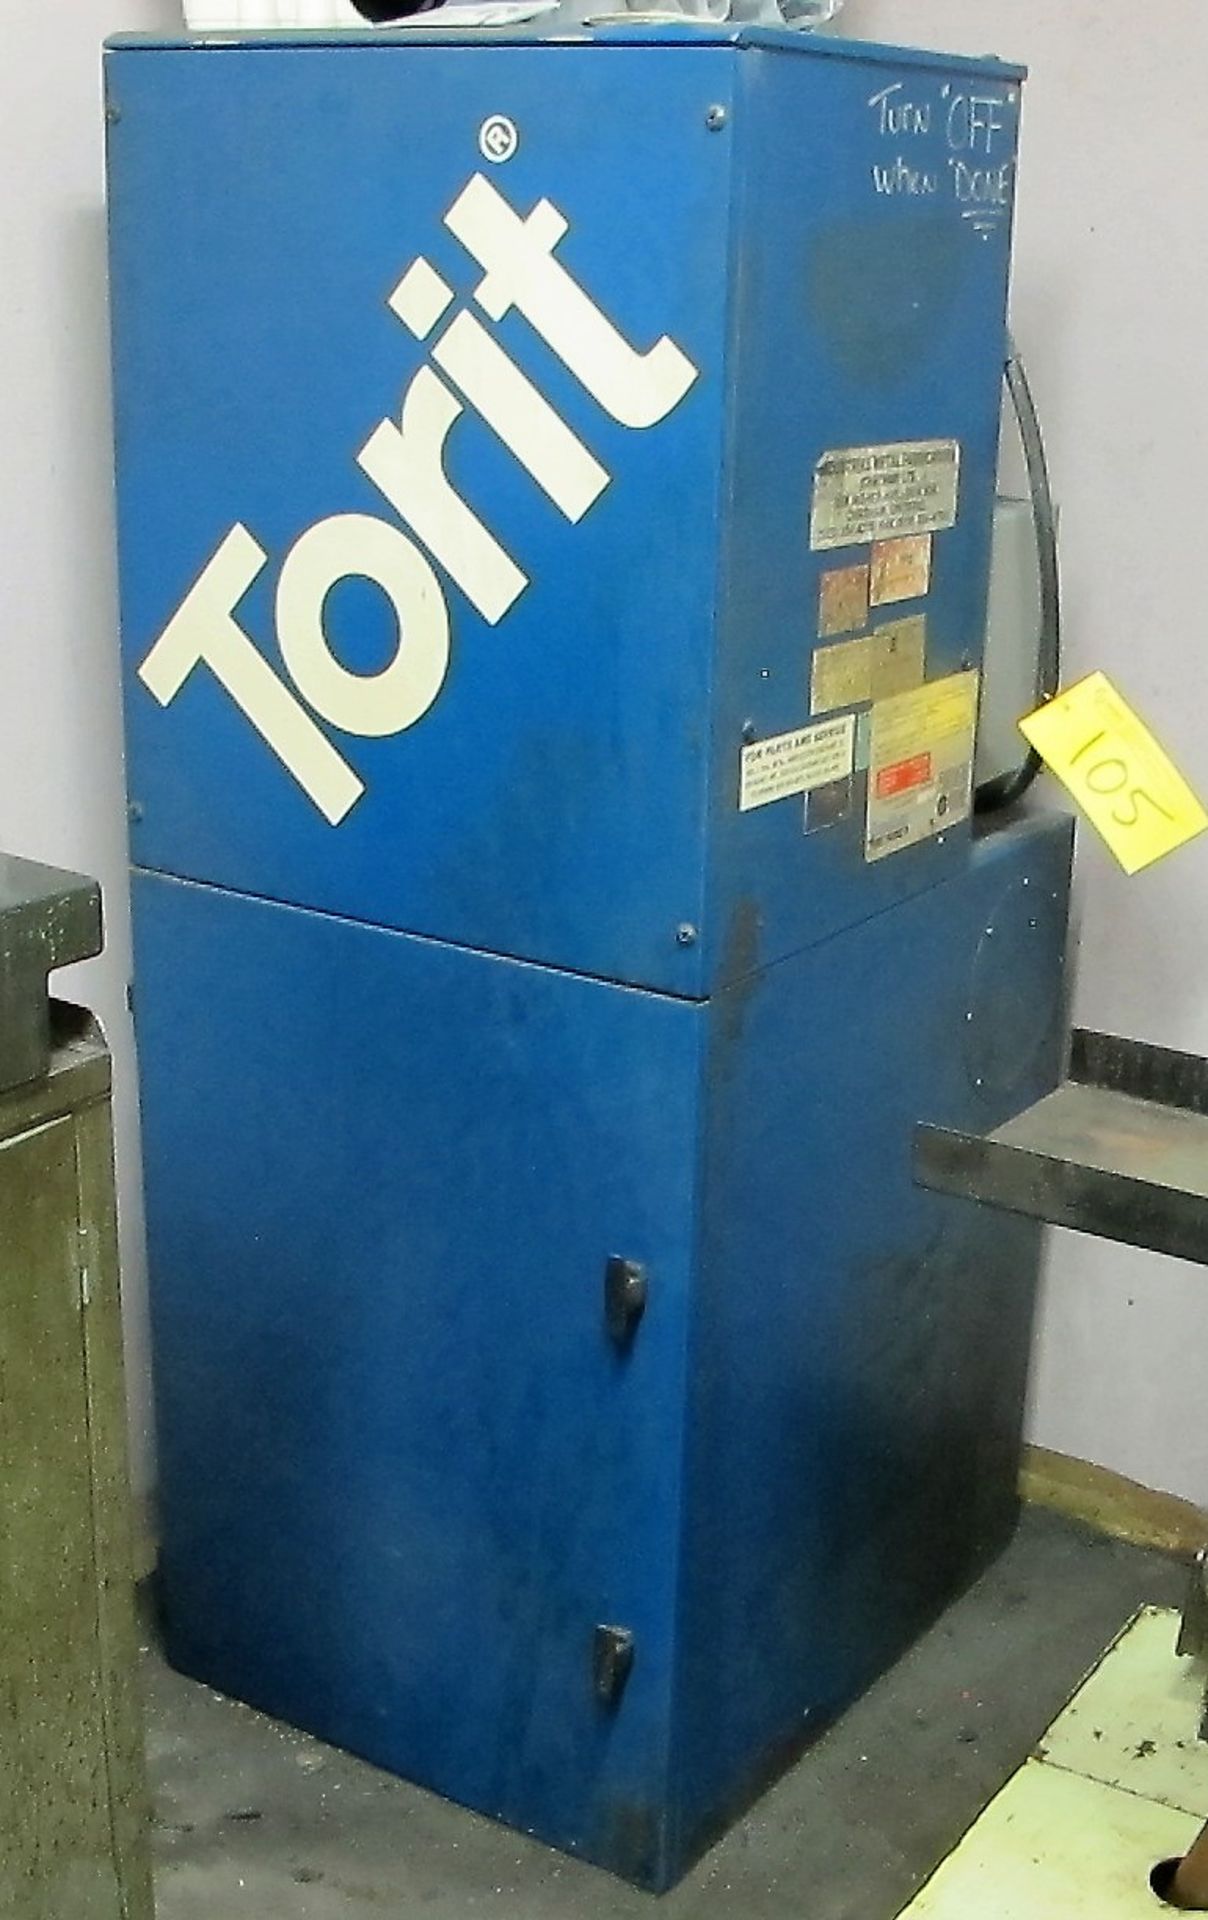 TORIT US1200 DUST COLLECTOR, S/N 1G537117-2